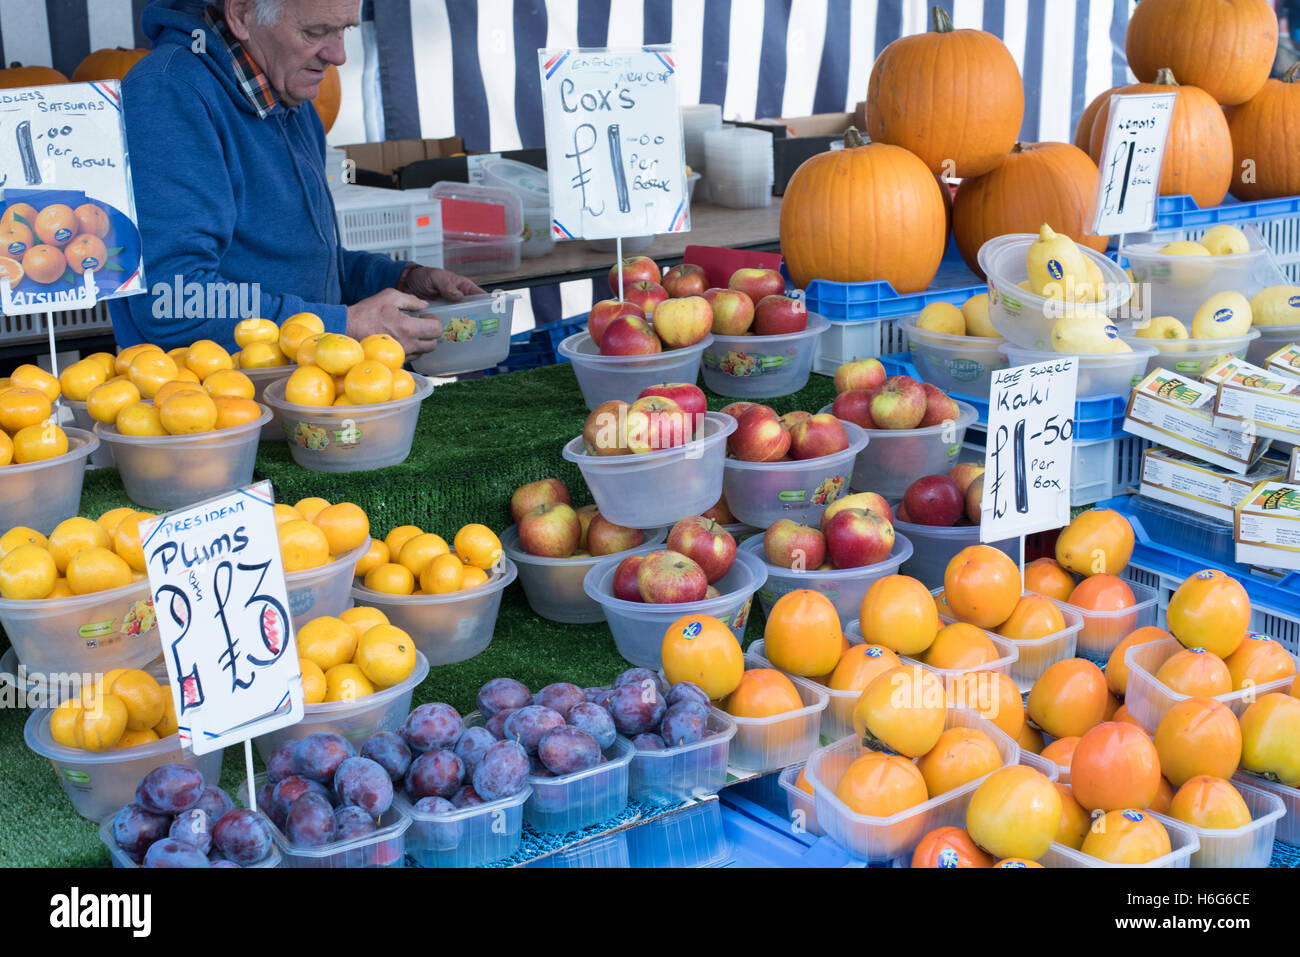 Fruit and vegetable market stall, Friday market, Brentwood, Essex Stock Photo